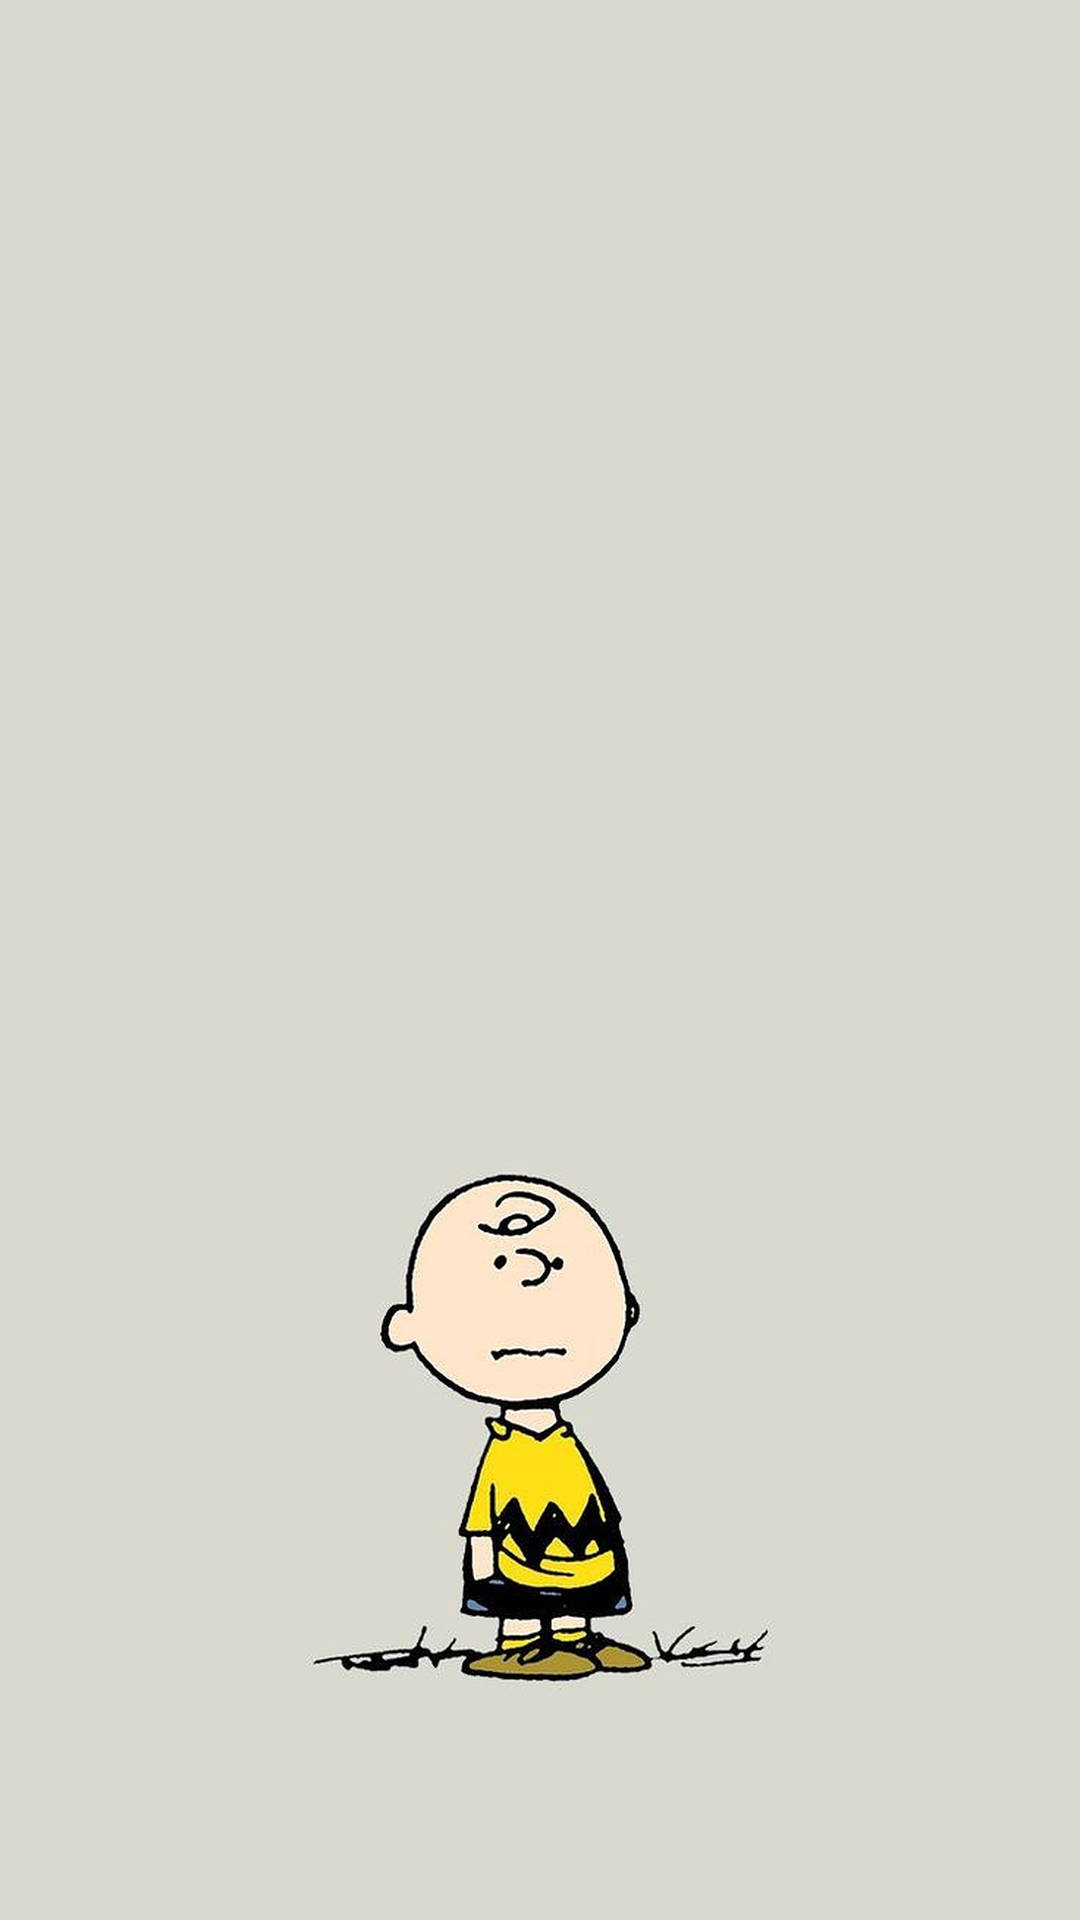 Lonely Charlie Brown Background